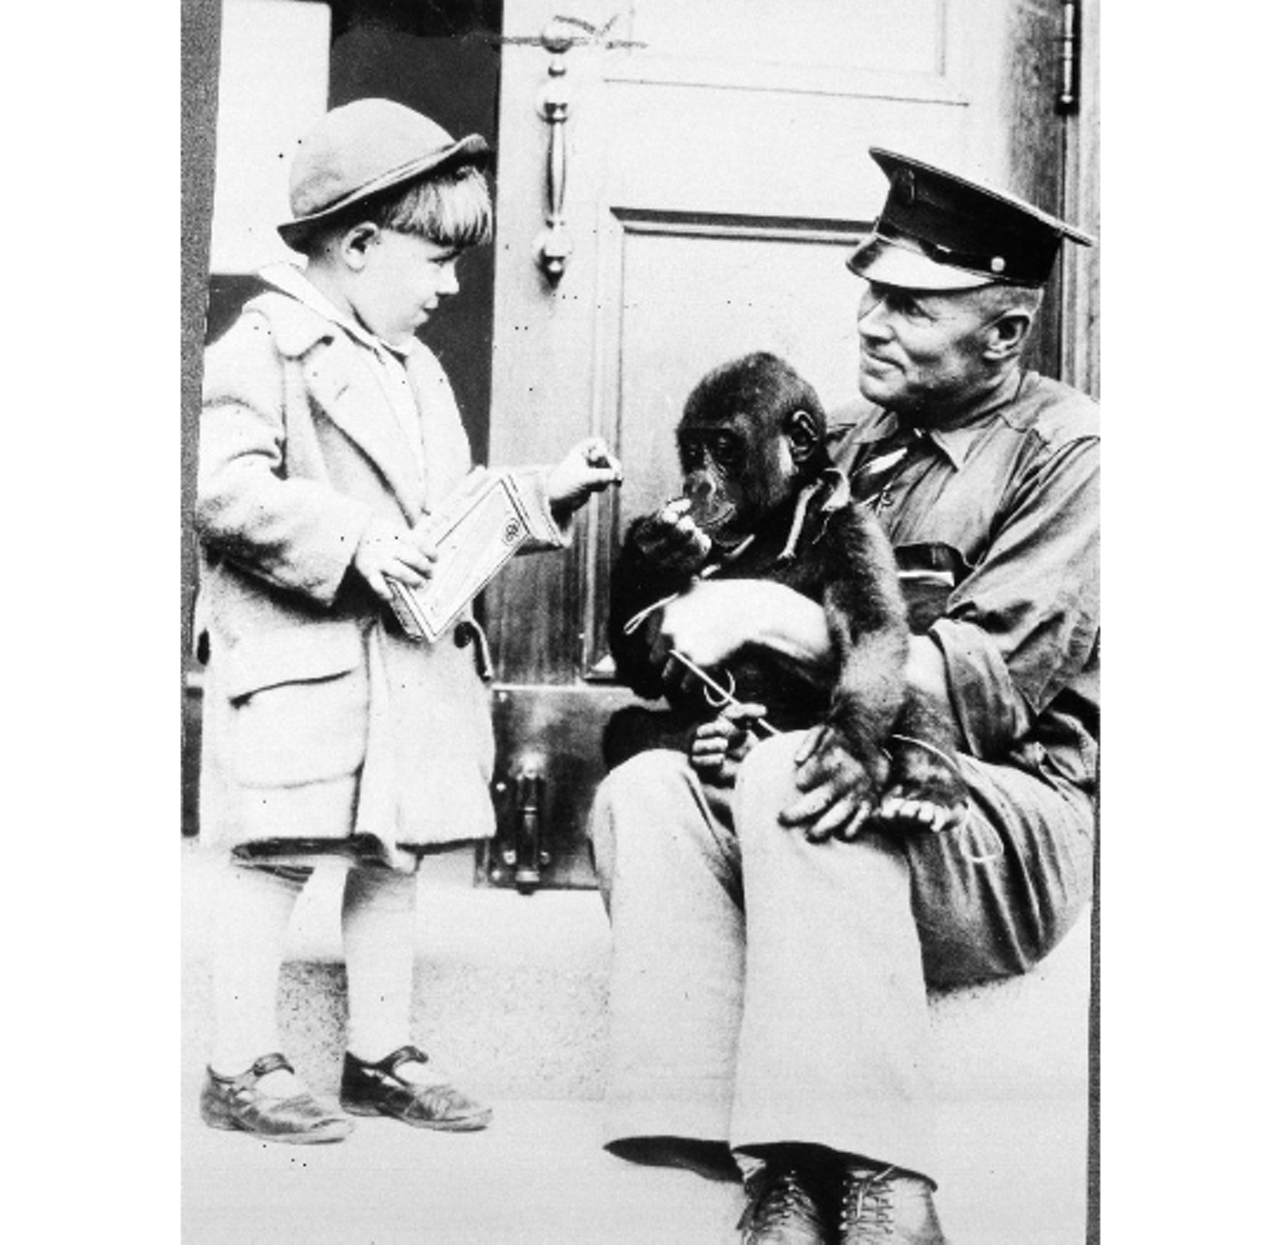 Another child petting an animal. (Date unknown)